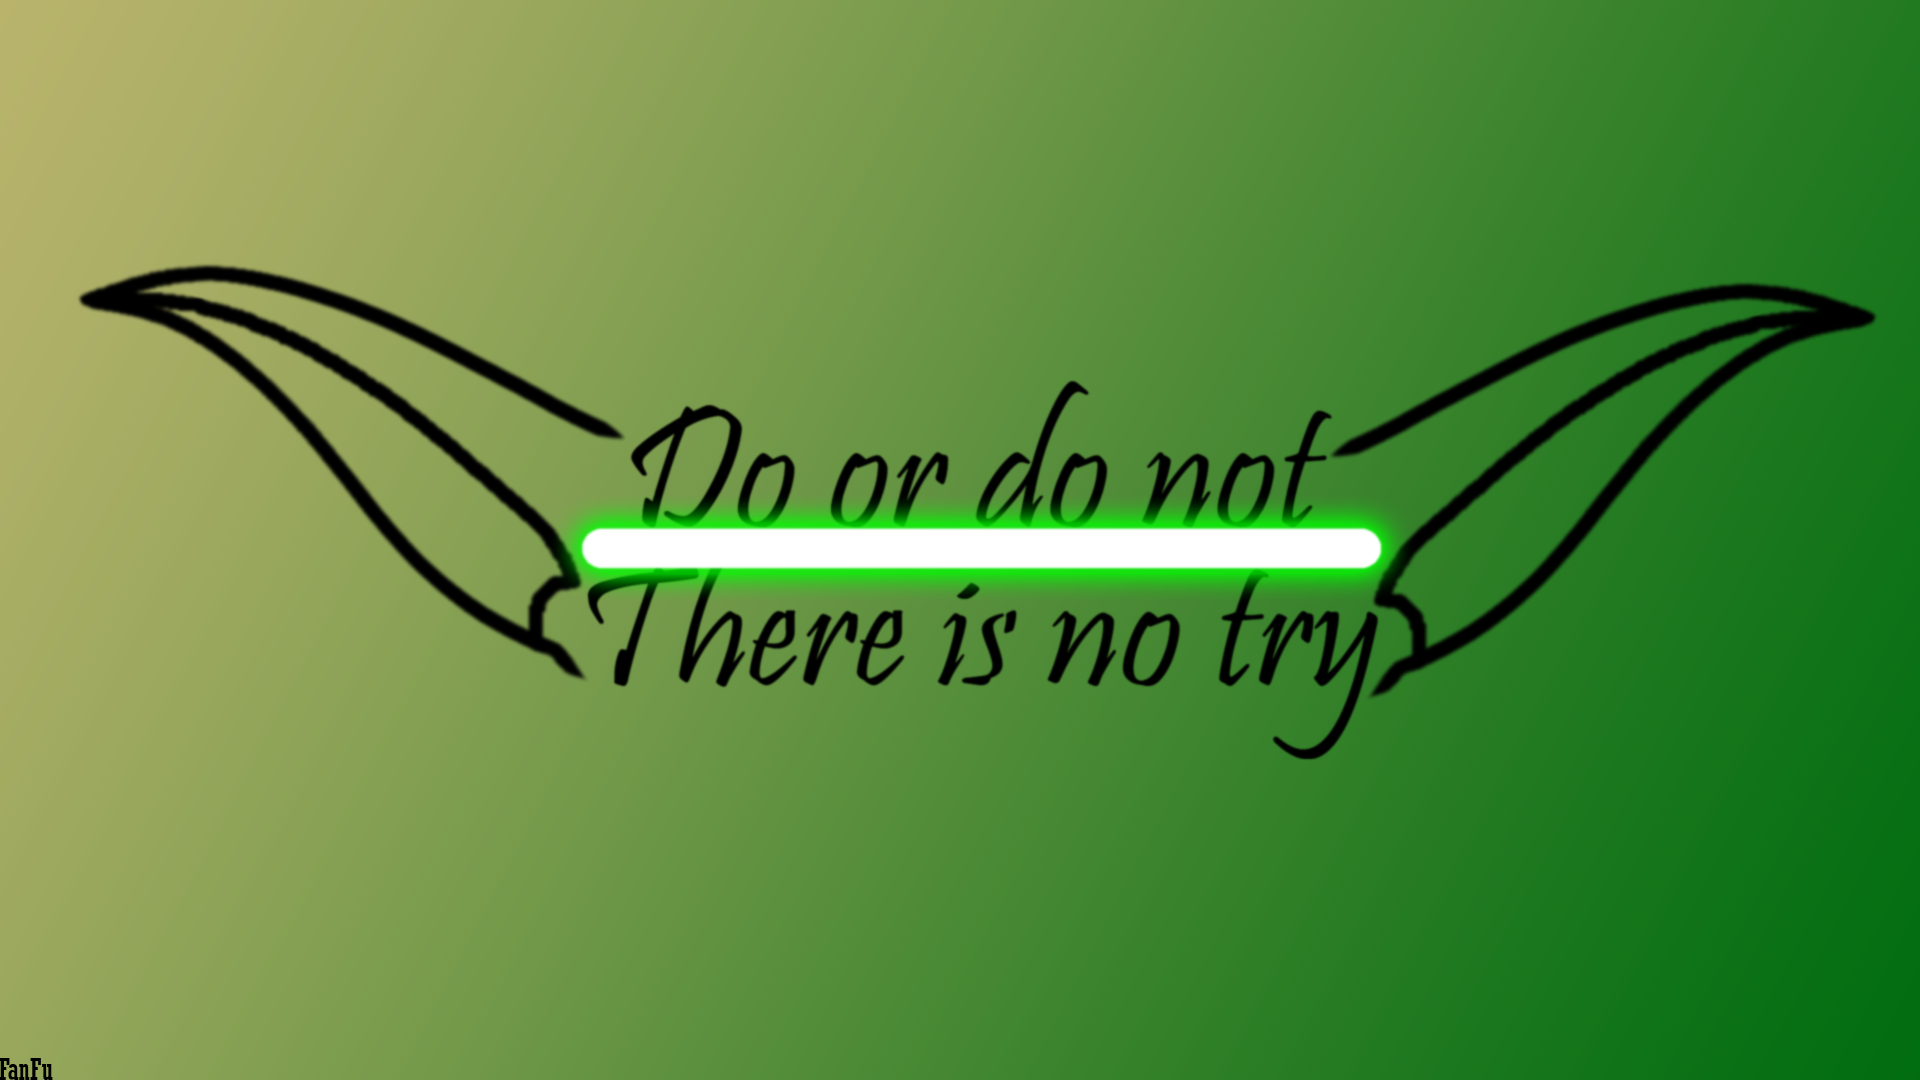 Do or do not, there is no try - Wallpaper by FanFu on DeviantArt